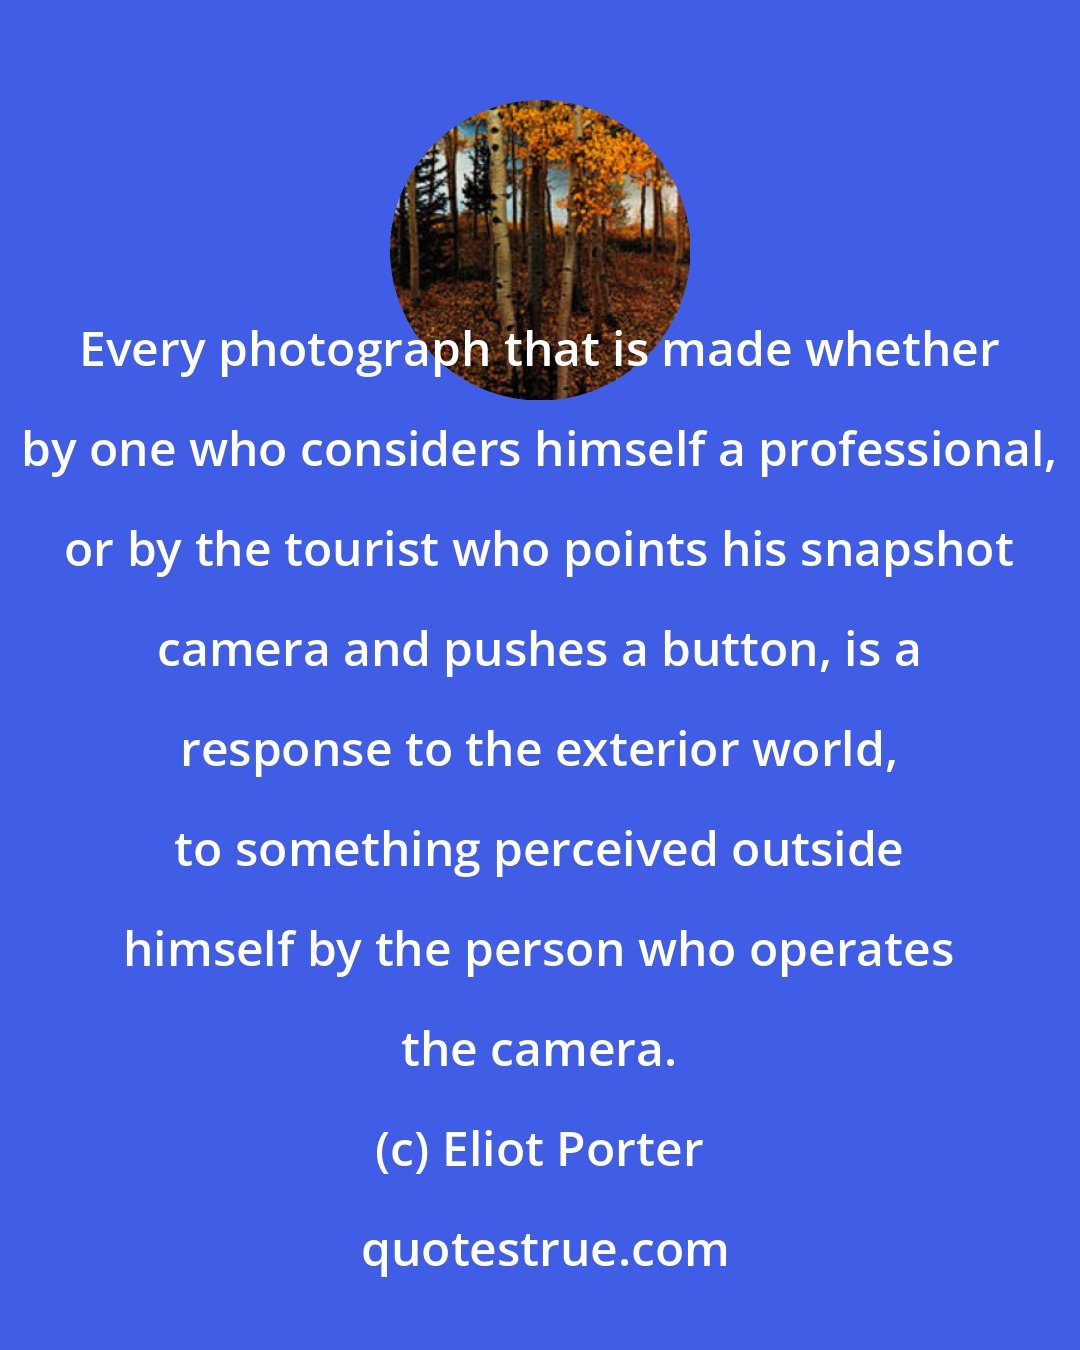 Eliot Porter: Every photograph that is made whether by one who considers himself a professional, or by the tourist who points his snapshot camera and pushes a button, is a response to the exterior world, to something perceived outside himself by the person who operates the camera.